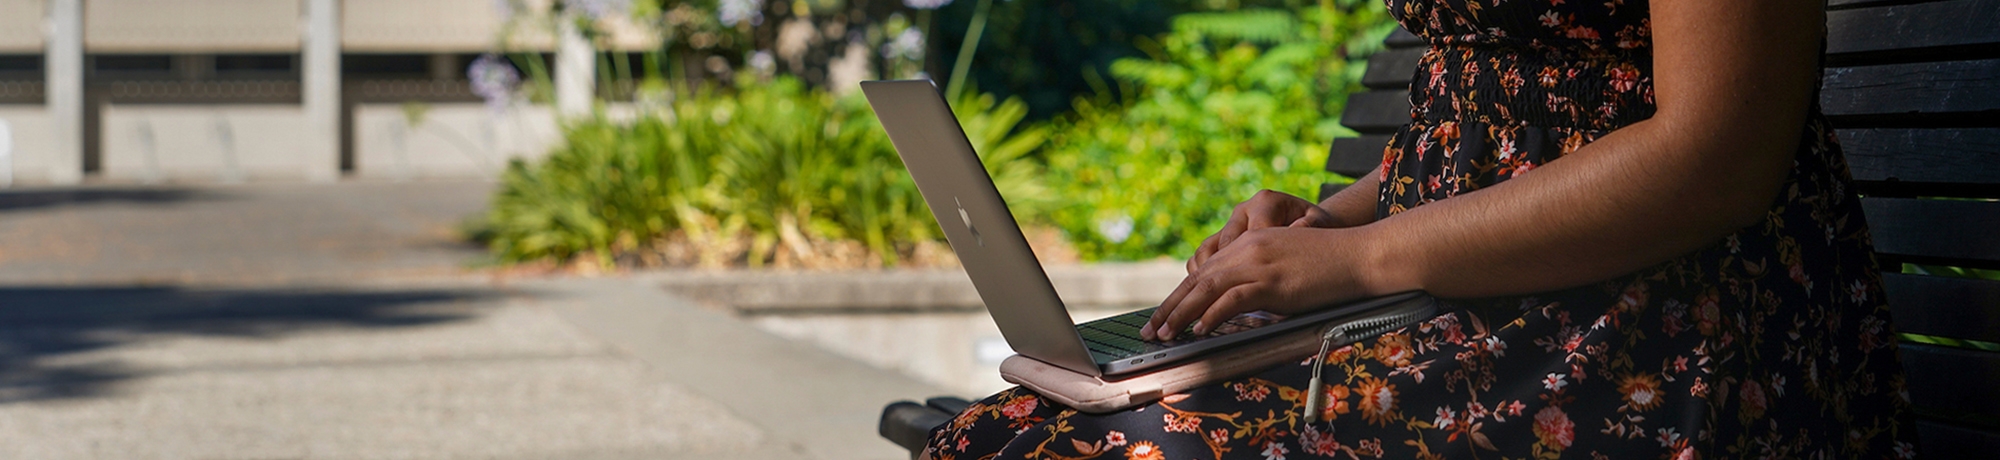 Person in floral dress working on the laptop outside on a bench.